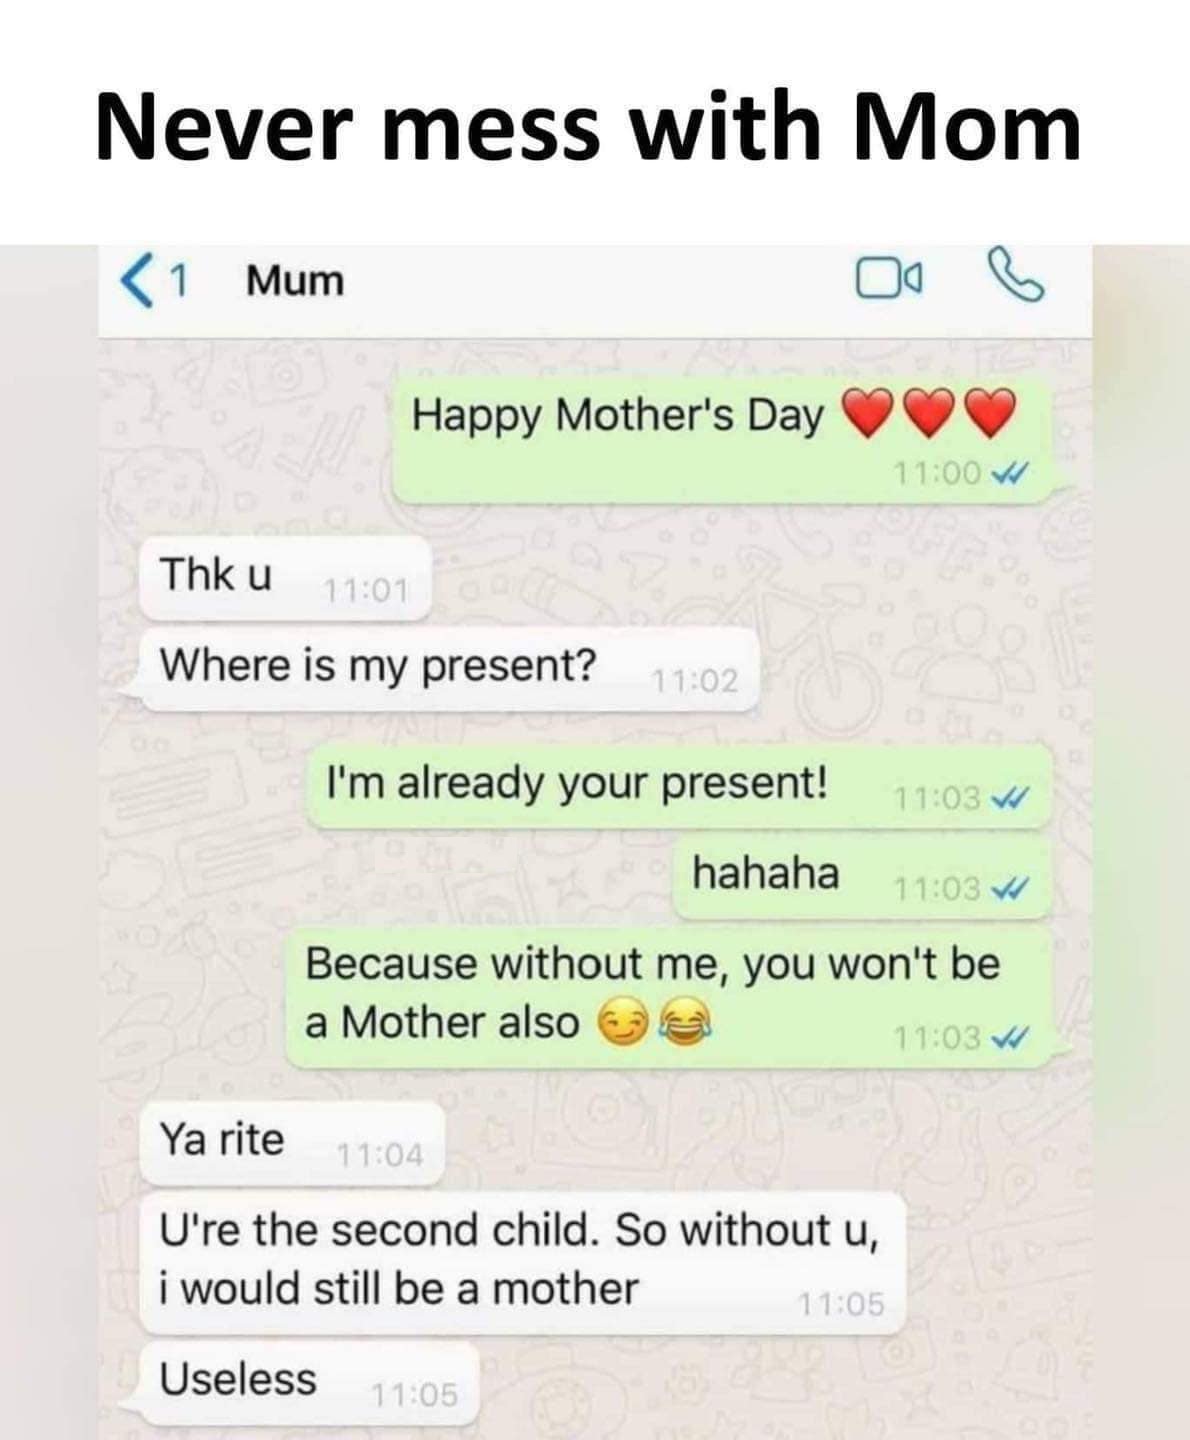 Never mess with Mom